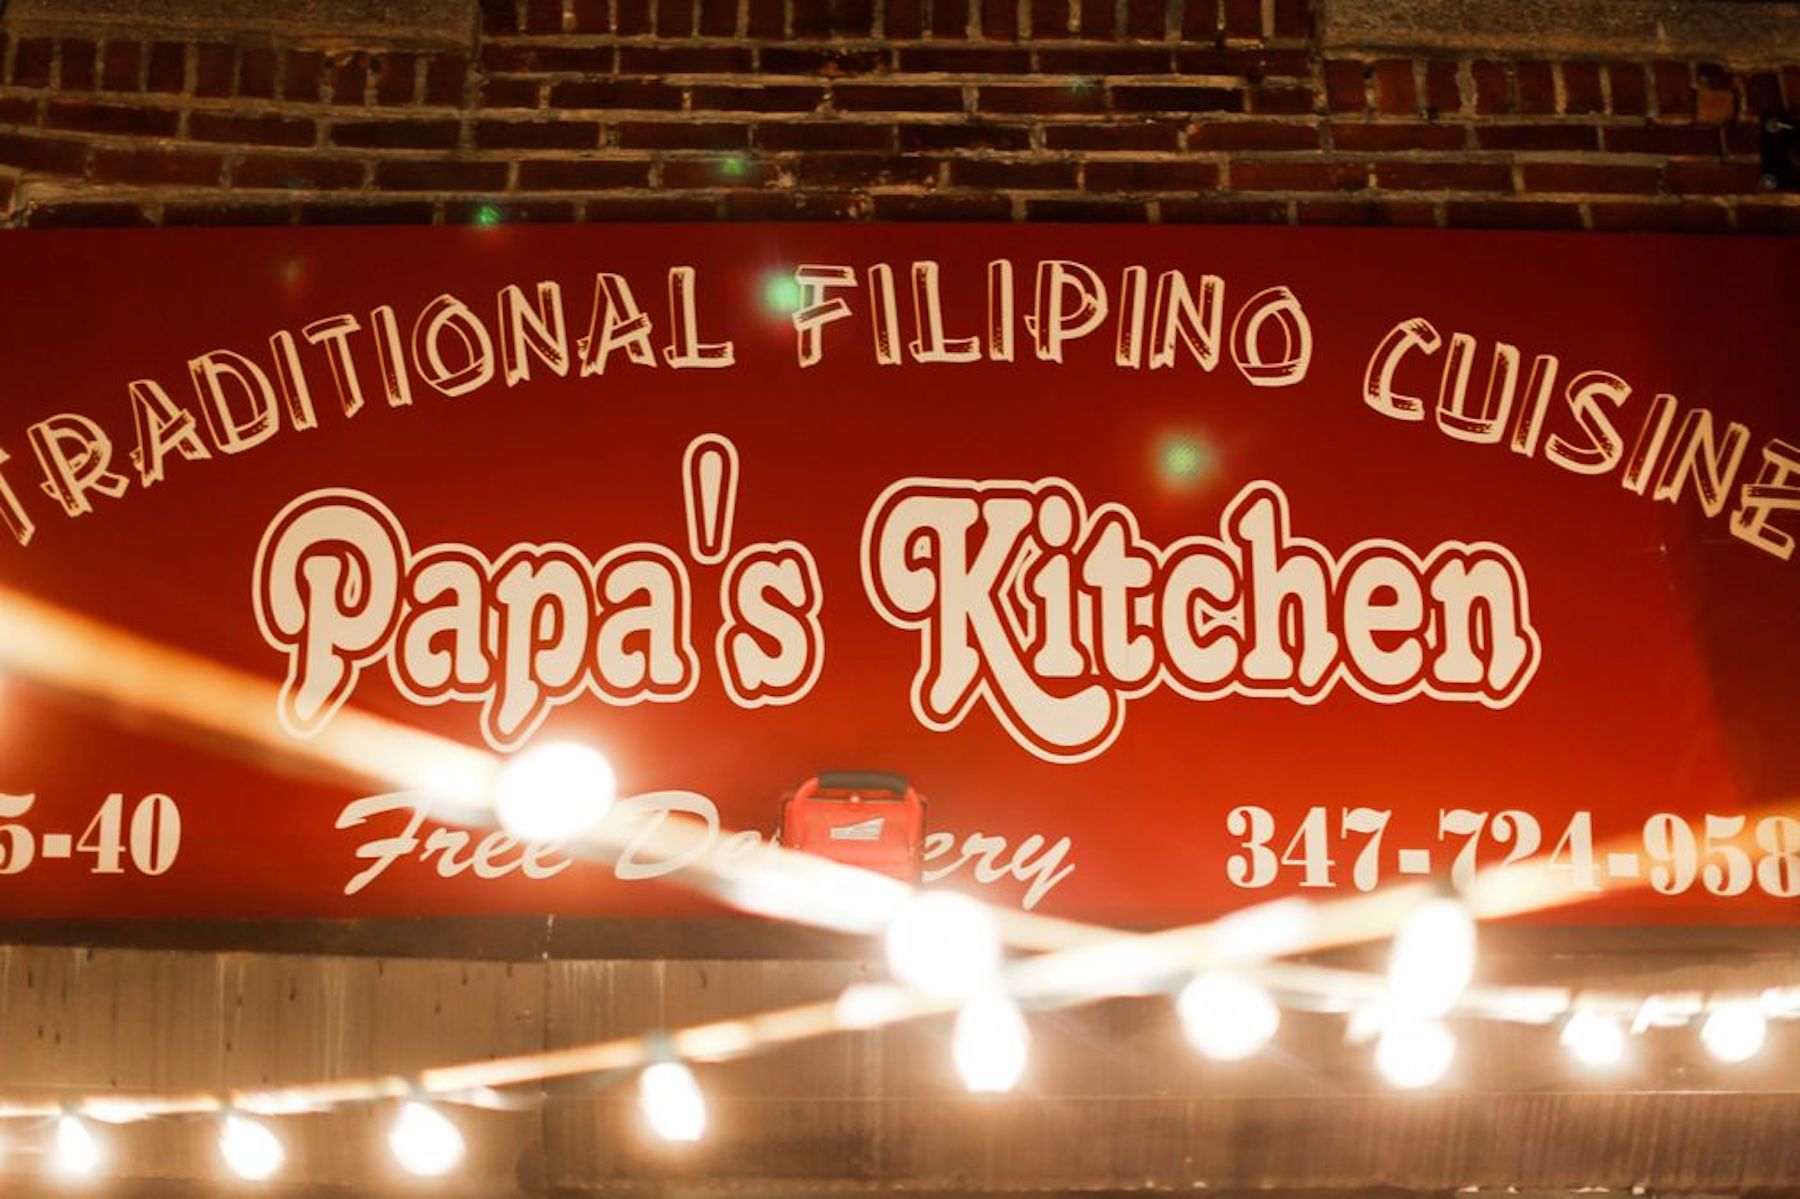 Sign in Papa's Kitchen, reading "Traditional Filipino Cuisine."